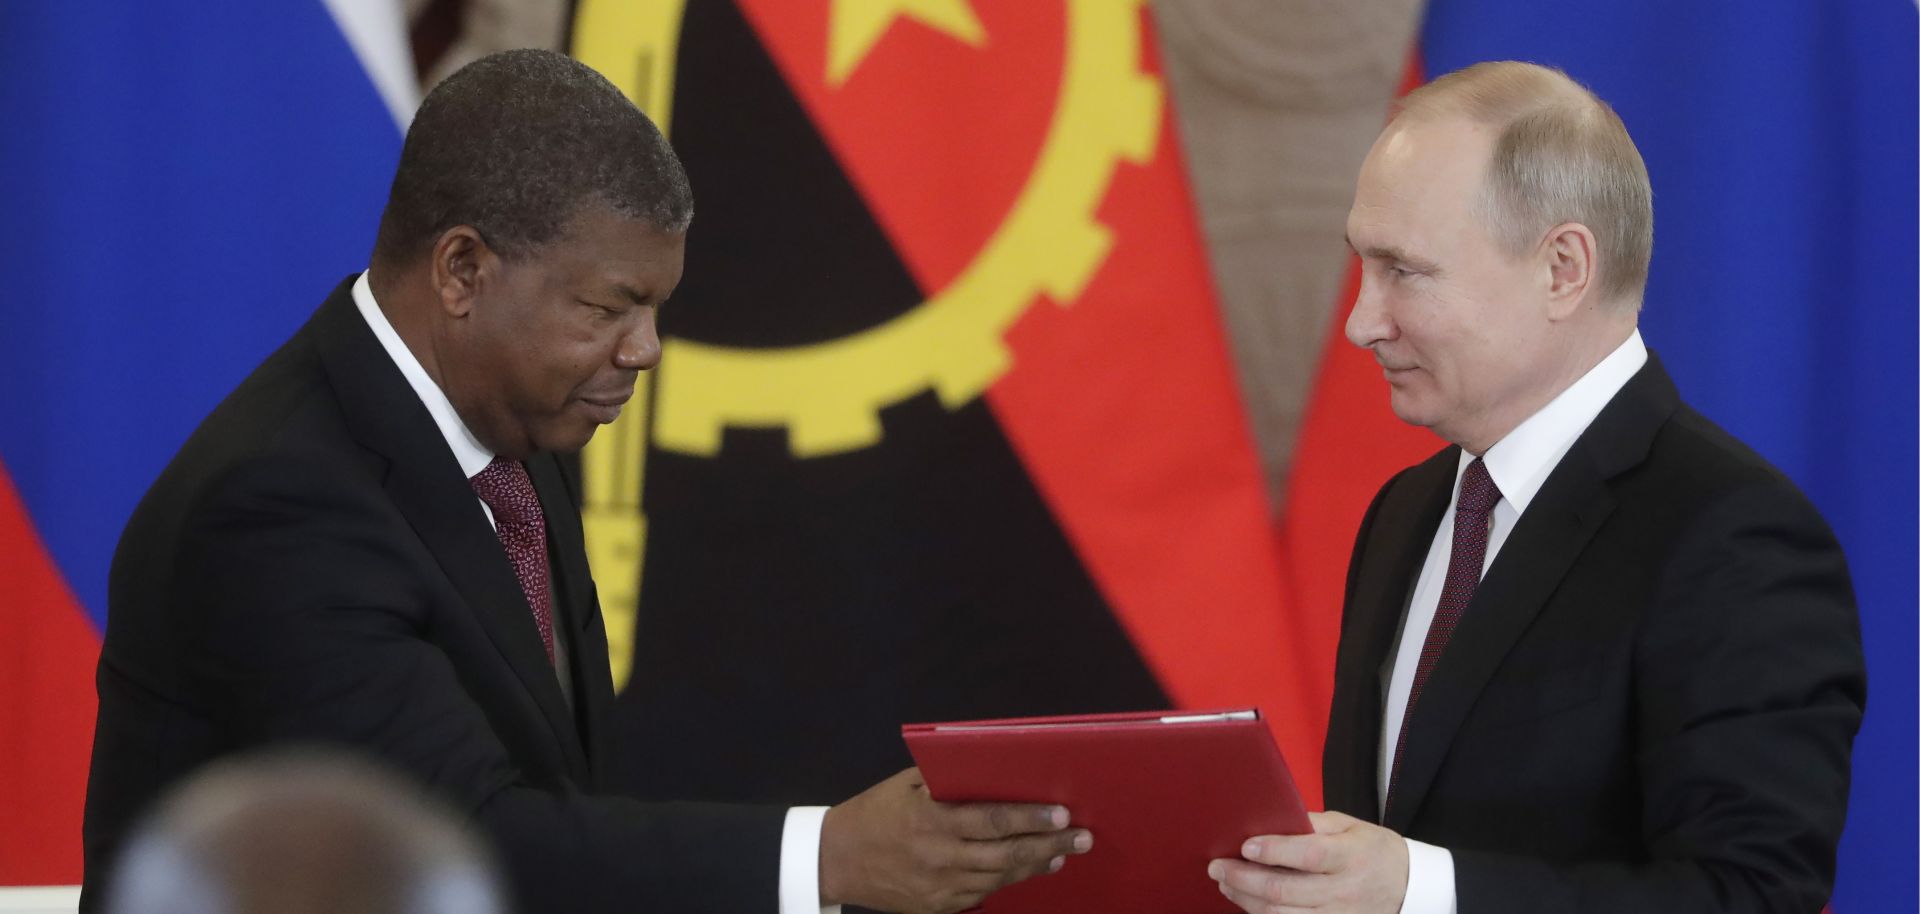 Angolan President Joao Lourenco, left, and Russian President Vladimir Putin exchange documents during a signing ceremony in Moscow on April 4, 2019.